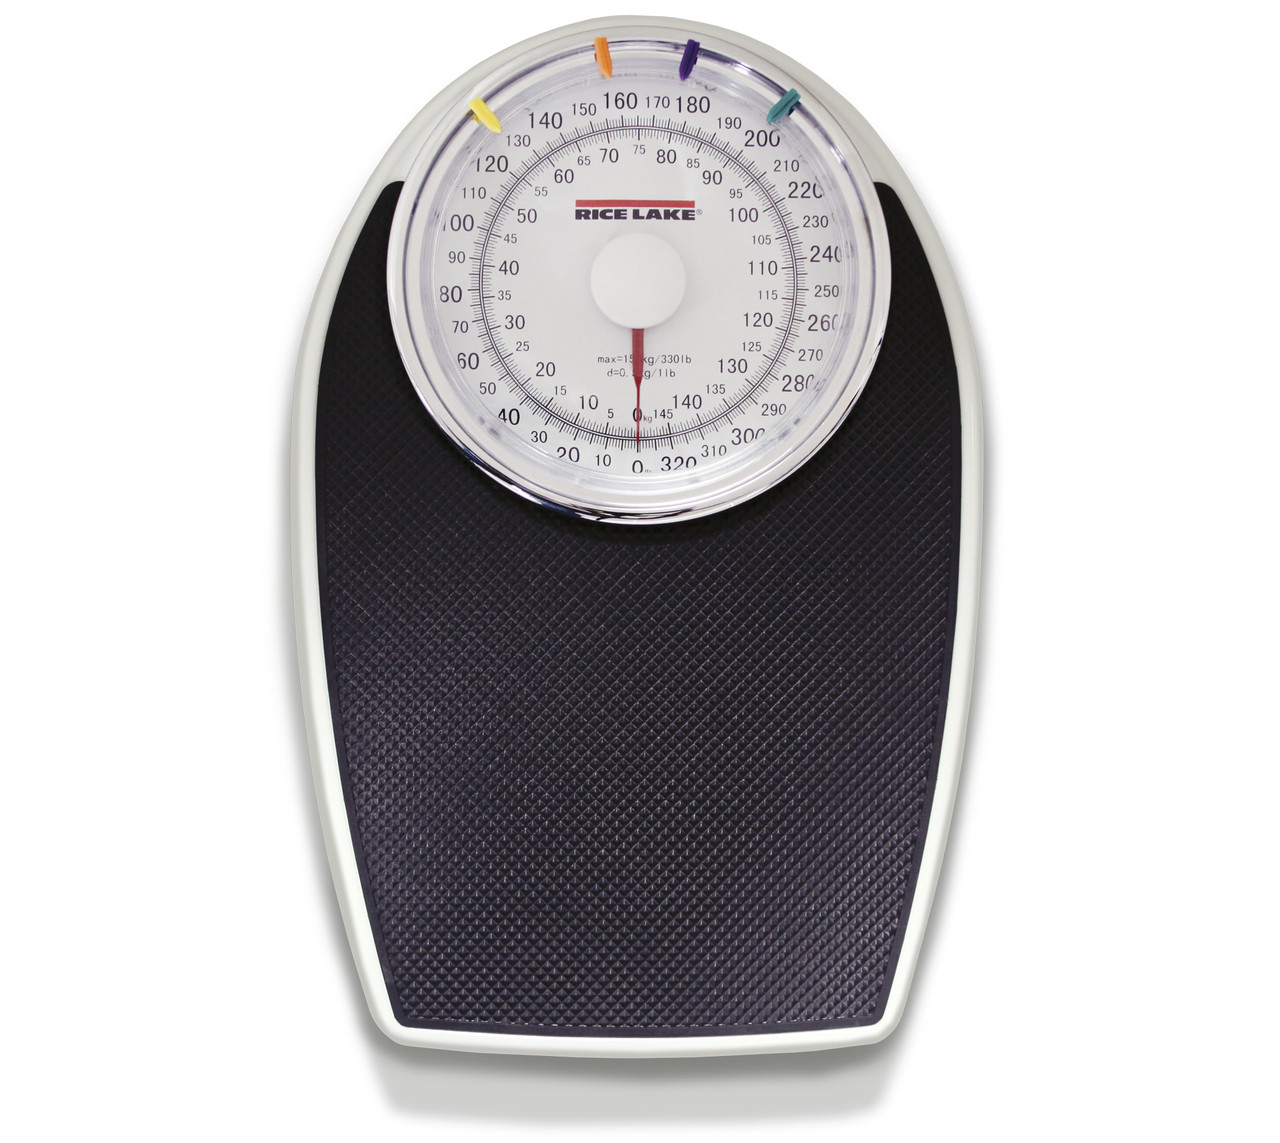 Body Weight Scale Bathroom Fitness Health Analog Mechanical Dial